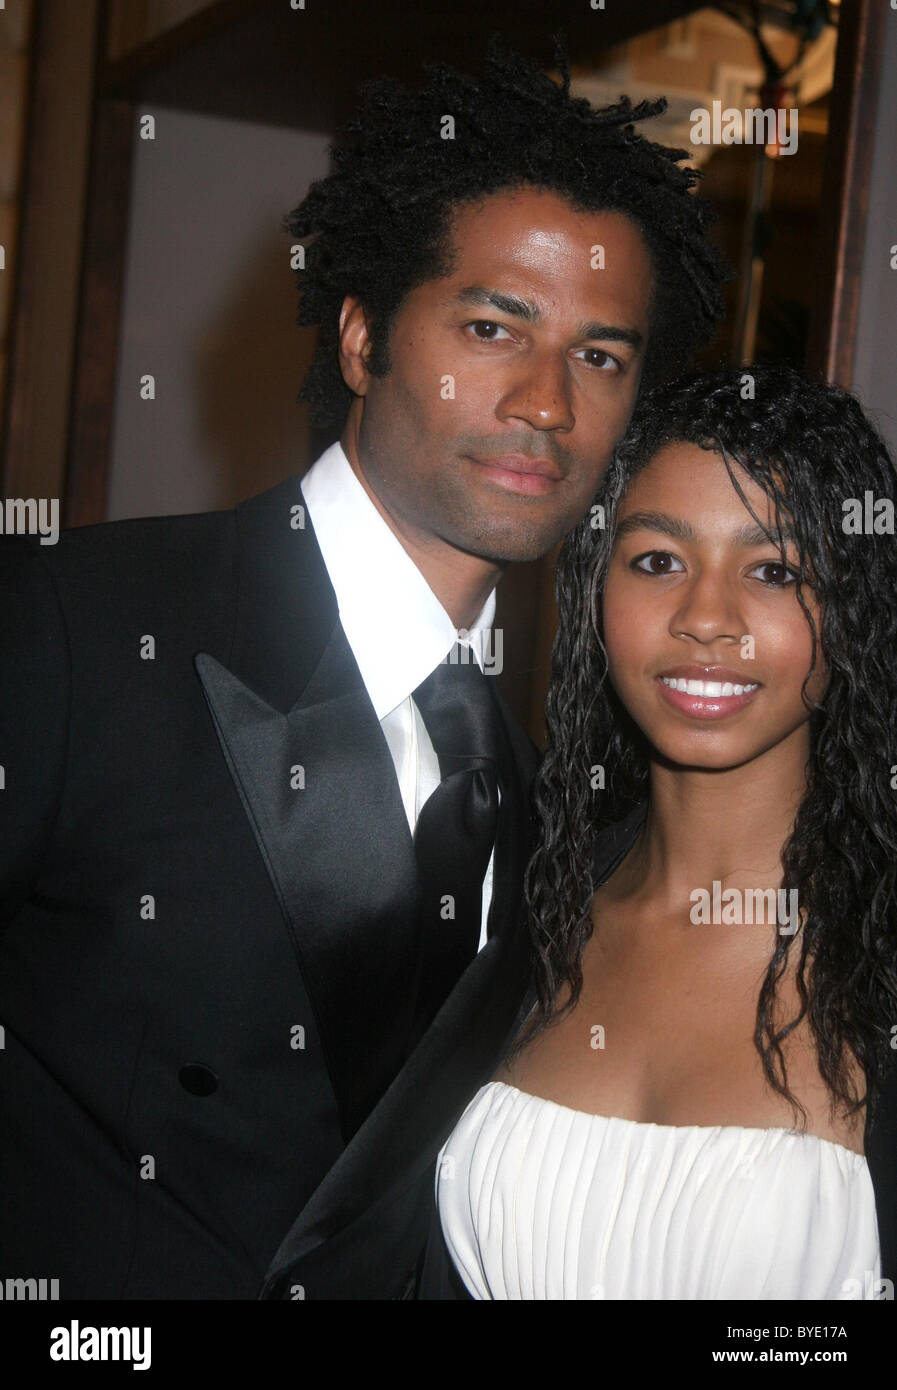 Eric Benet and daughter India Benet Trumpet Awards 2007 held at the Bellagio Hotel and Casino Las Vegas, Nevada - 22.01.07 Stock Photo